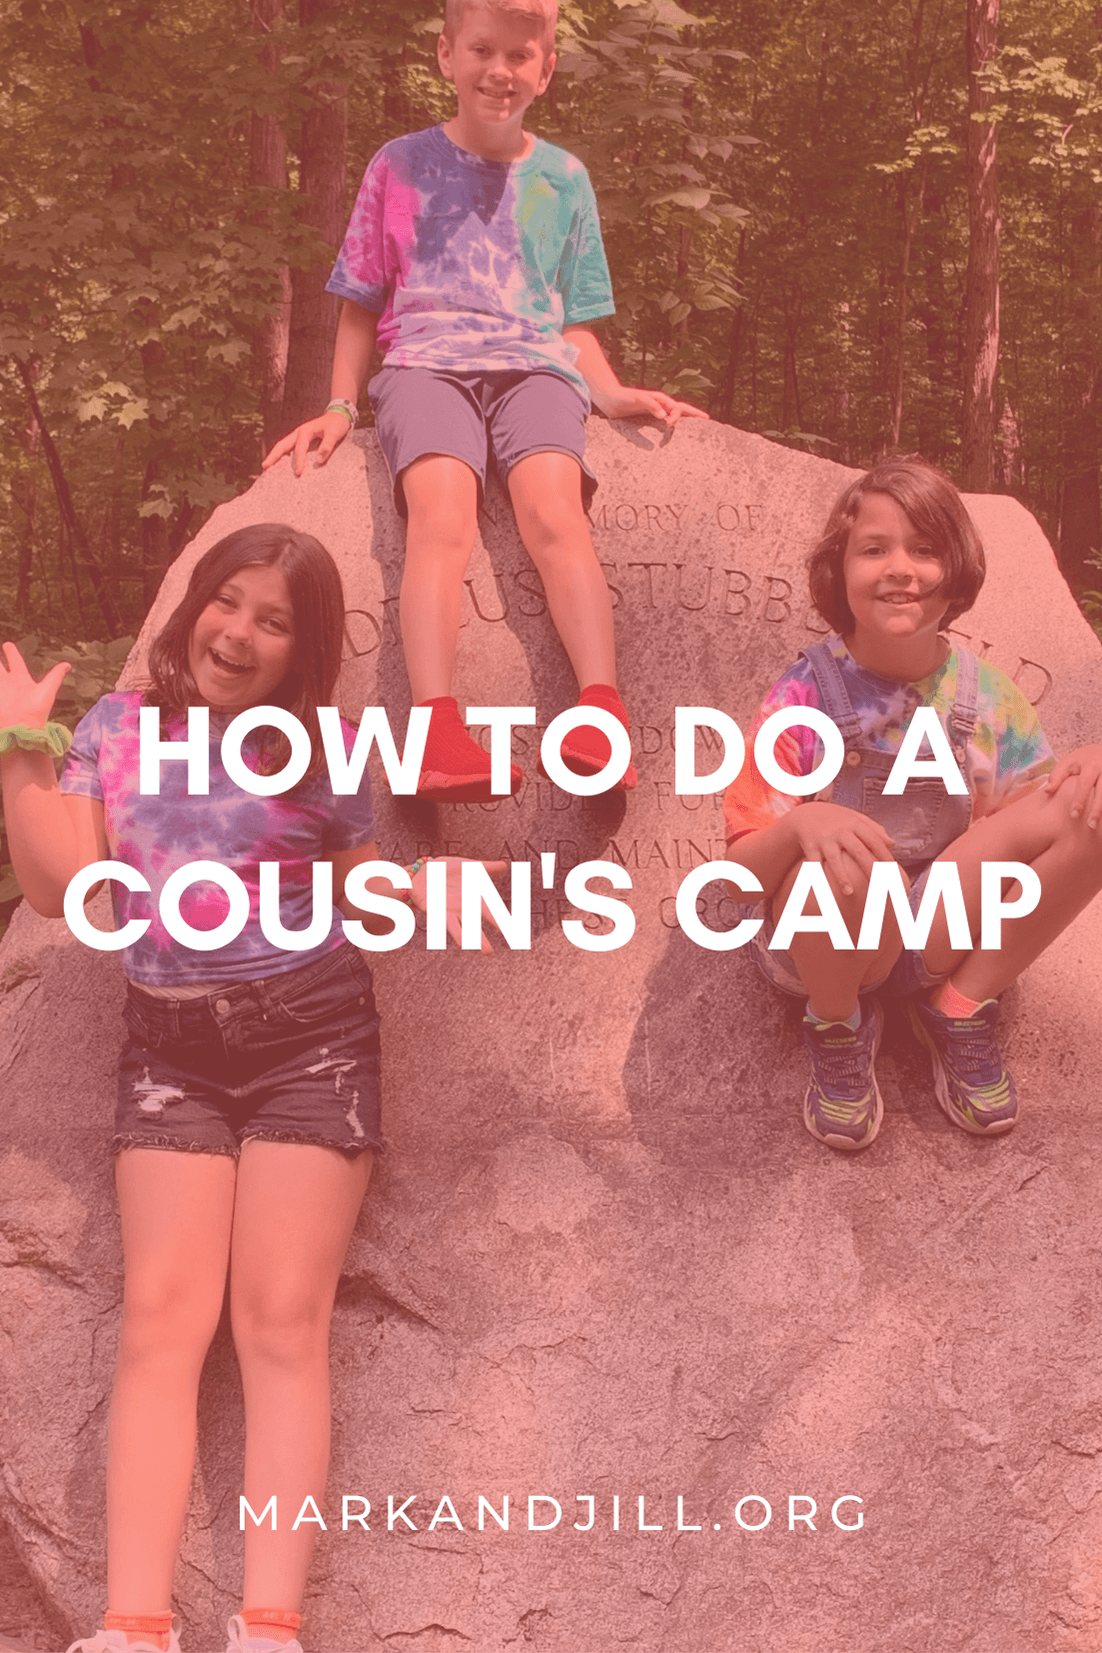 How To Do a Cousin’s Camp